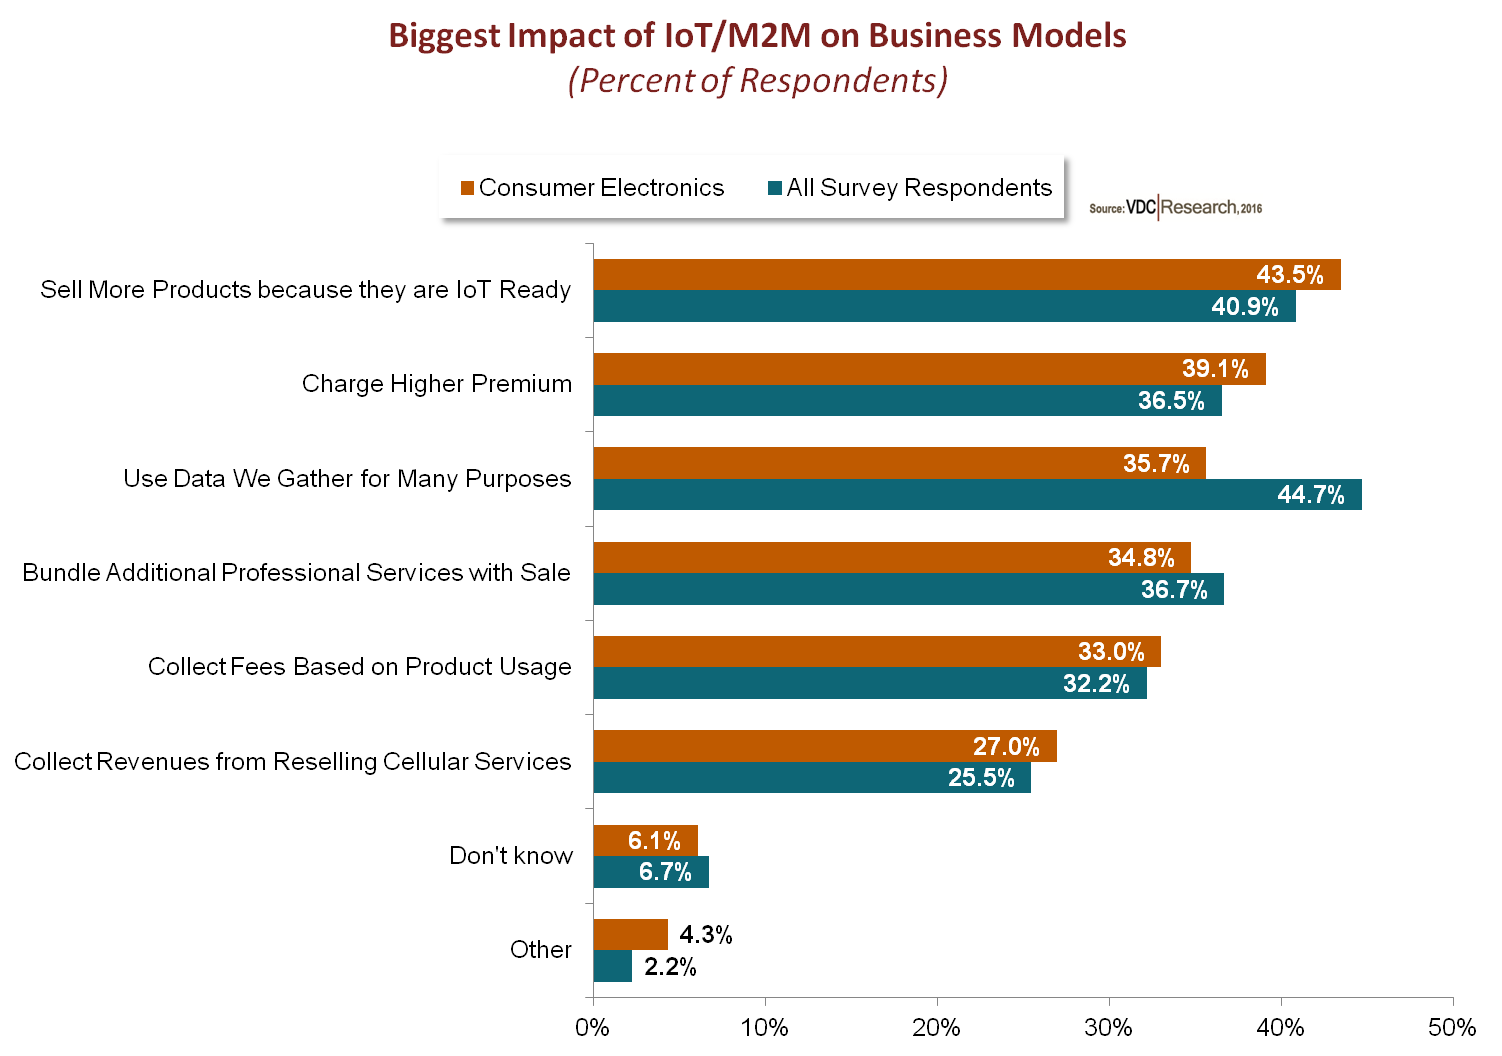 Biggest Impact of IoT/M2M on Business Models